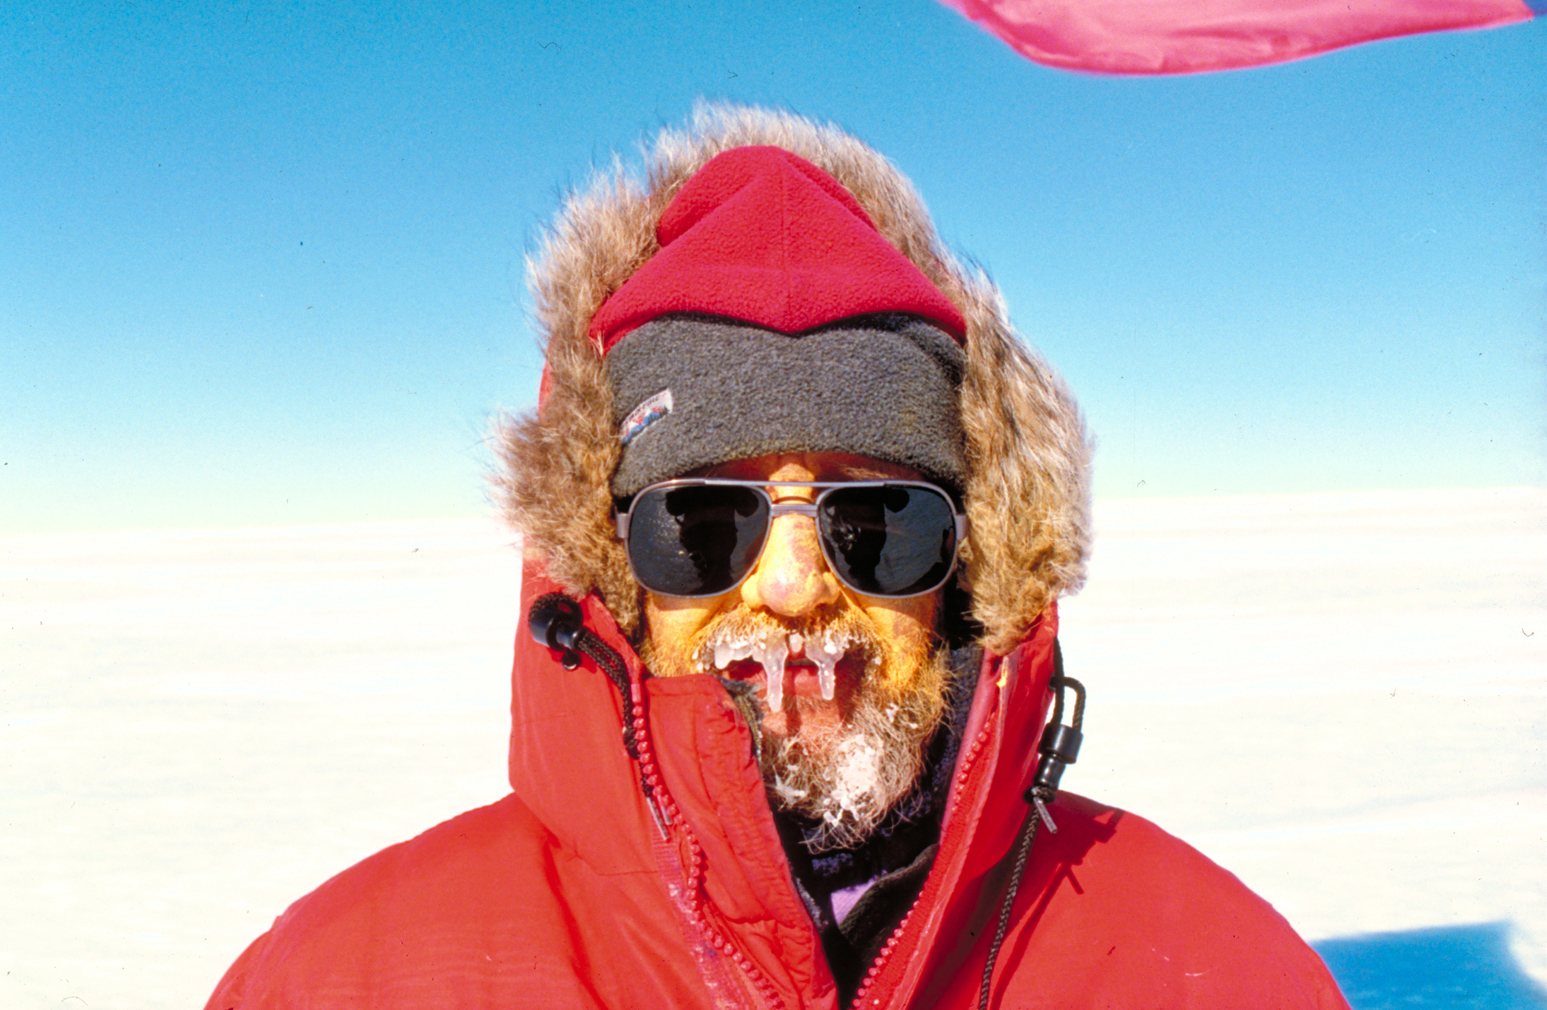 Close-up picture of a man outdoors in Antarctica dressed in heavy, red winter clothing with ice on his face